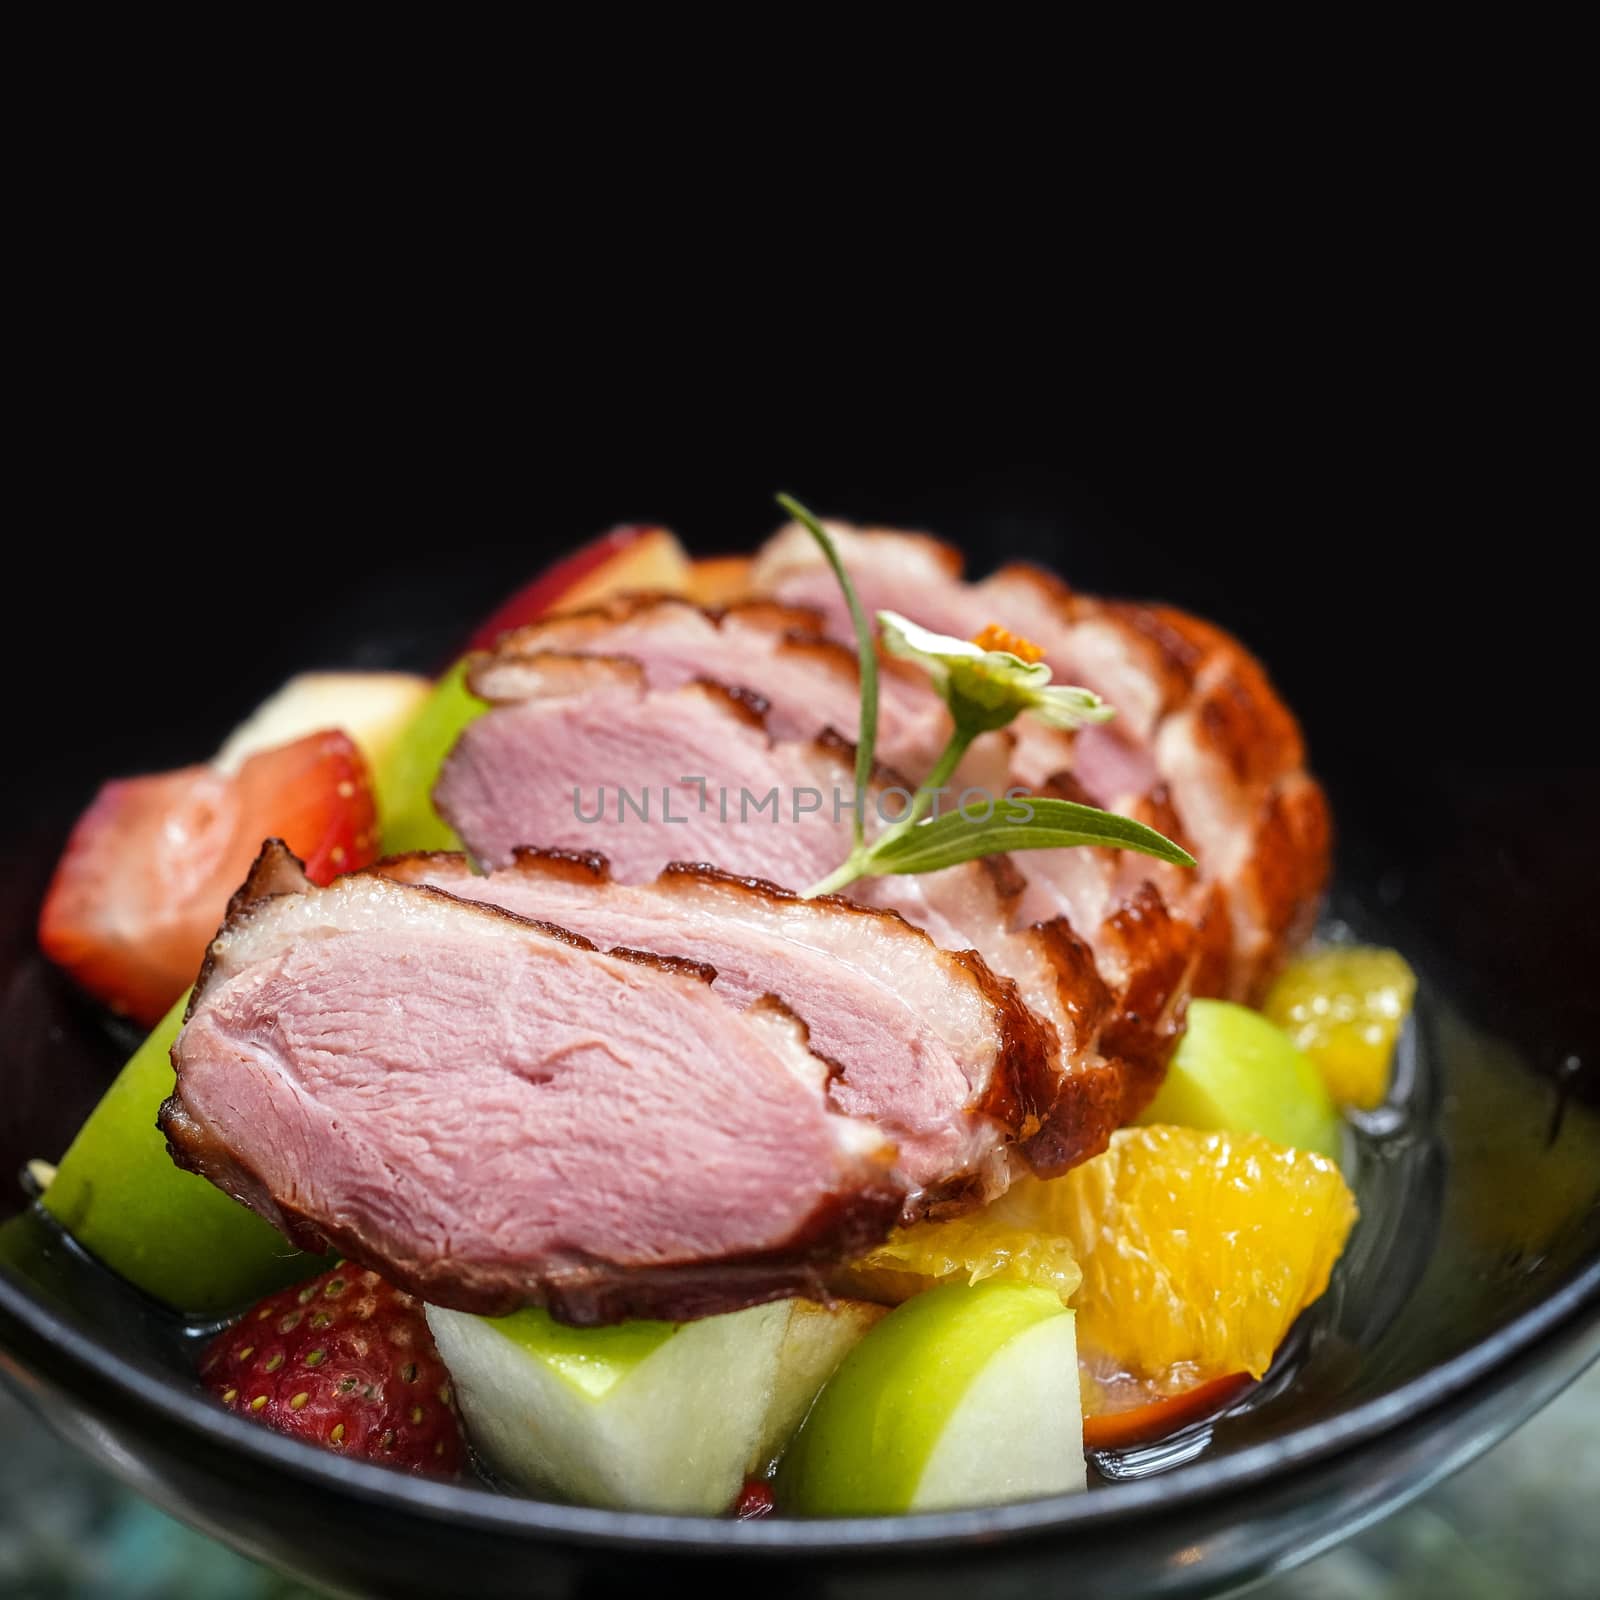 Homemade smoked duck breast served with a variety of fruits. Green Apple, Orange and Strawberry.